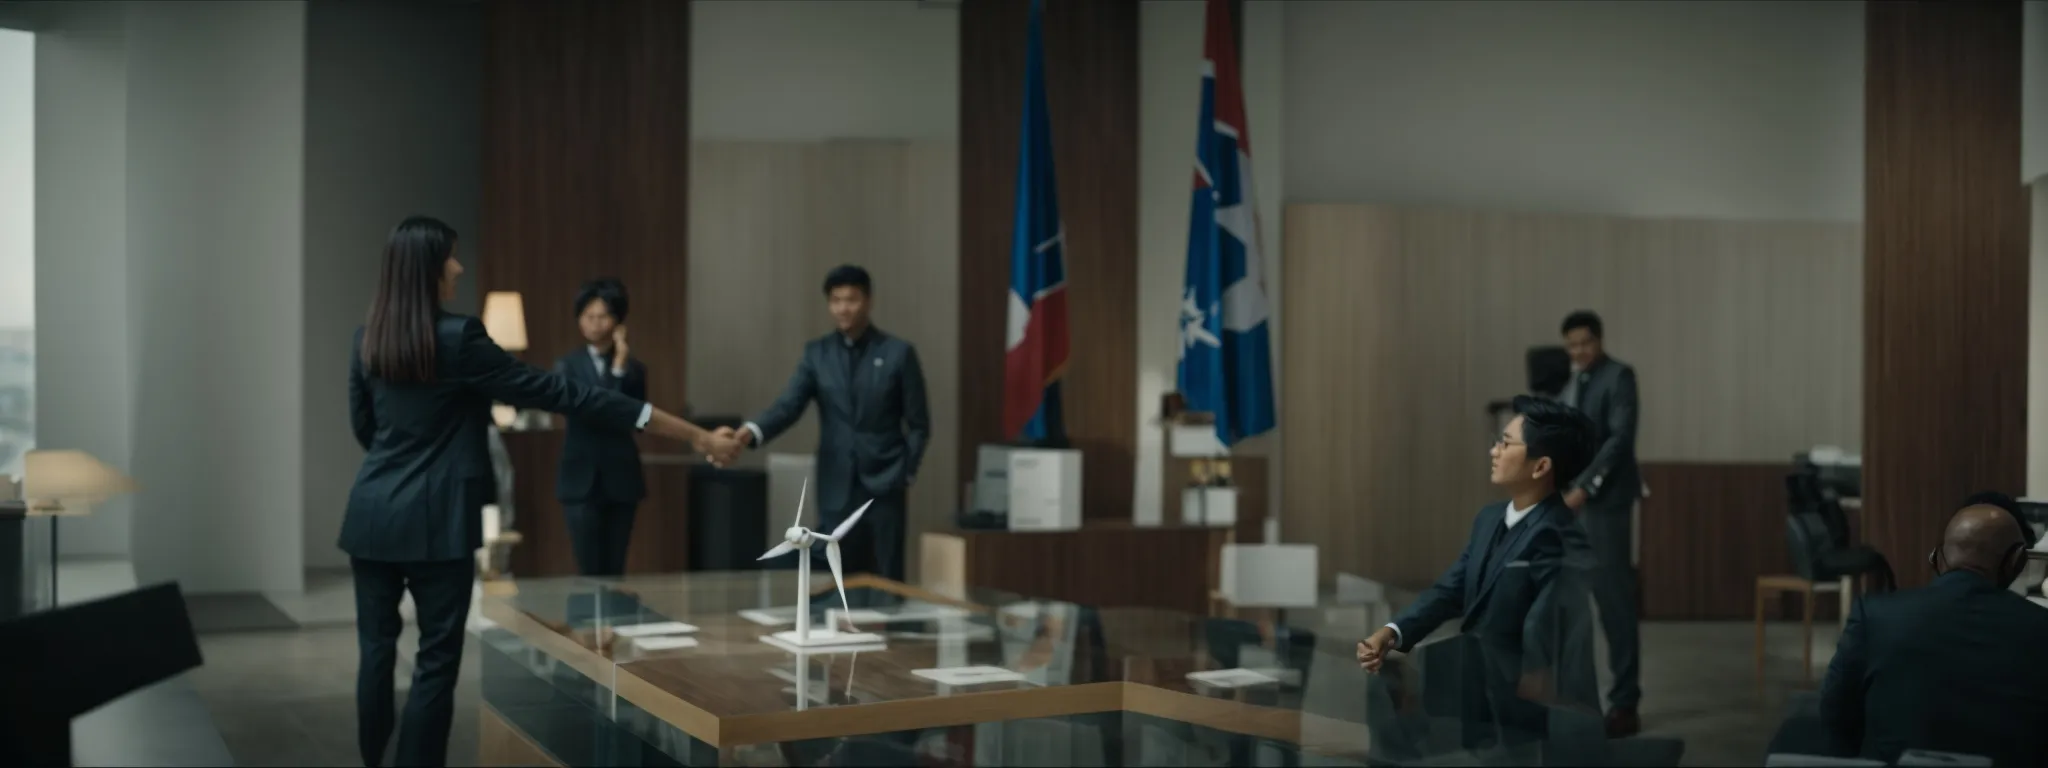 a professional shaking hands over a table with a large wind turbine model, symbolizing a successful energy investment partnership.